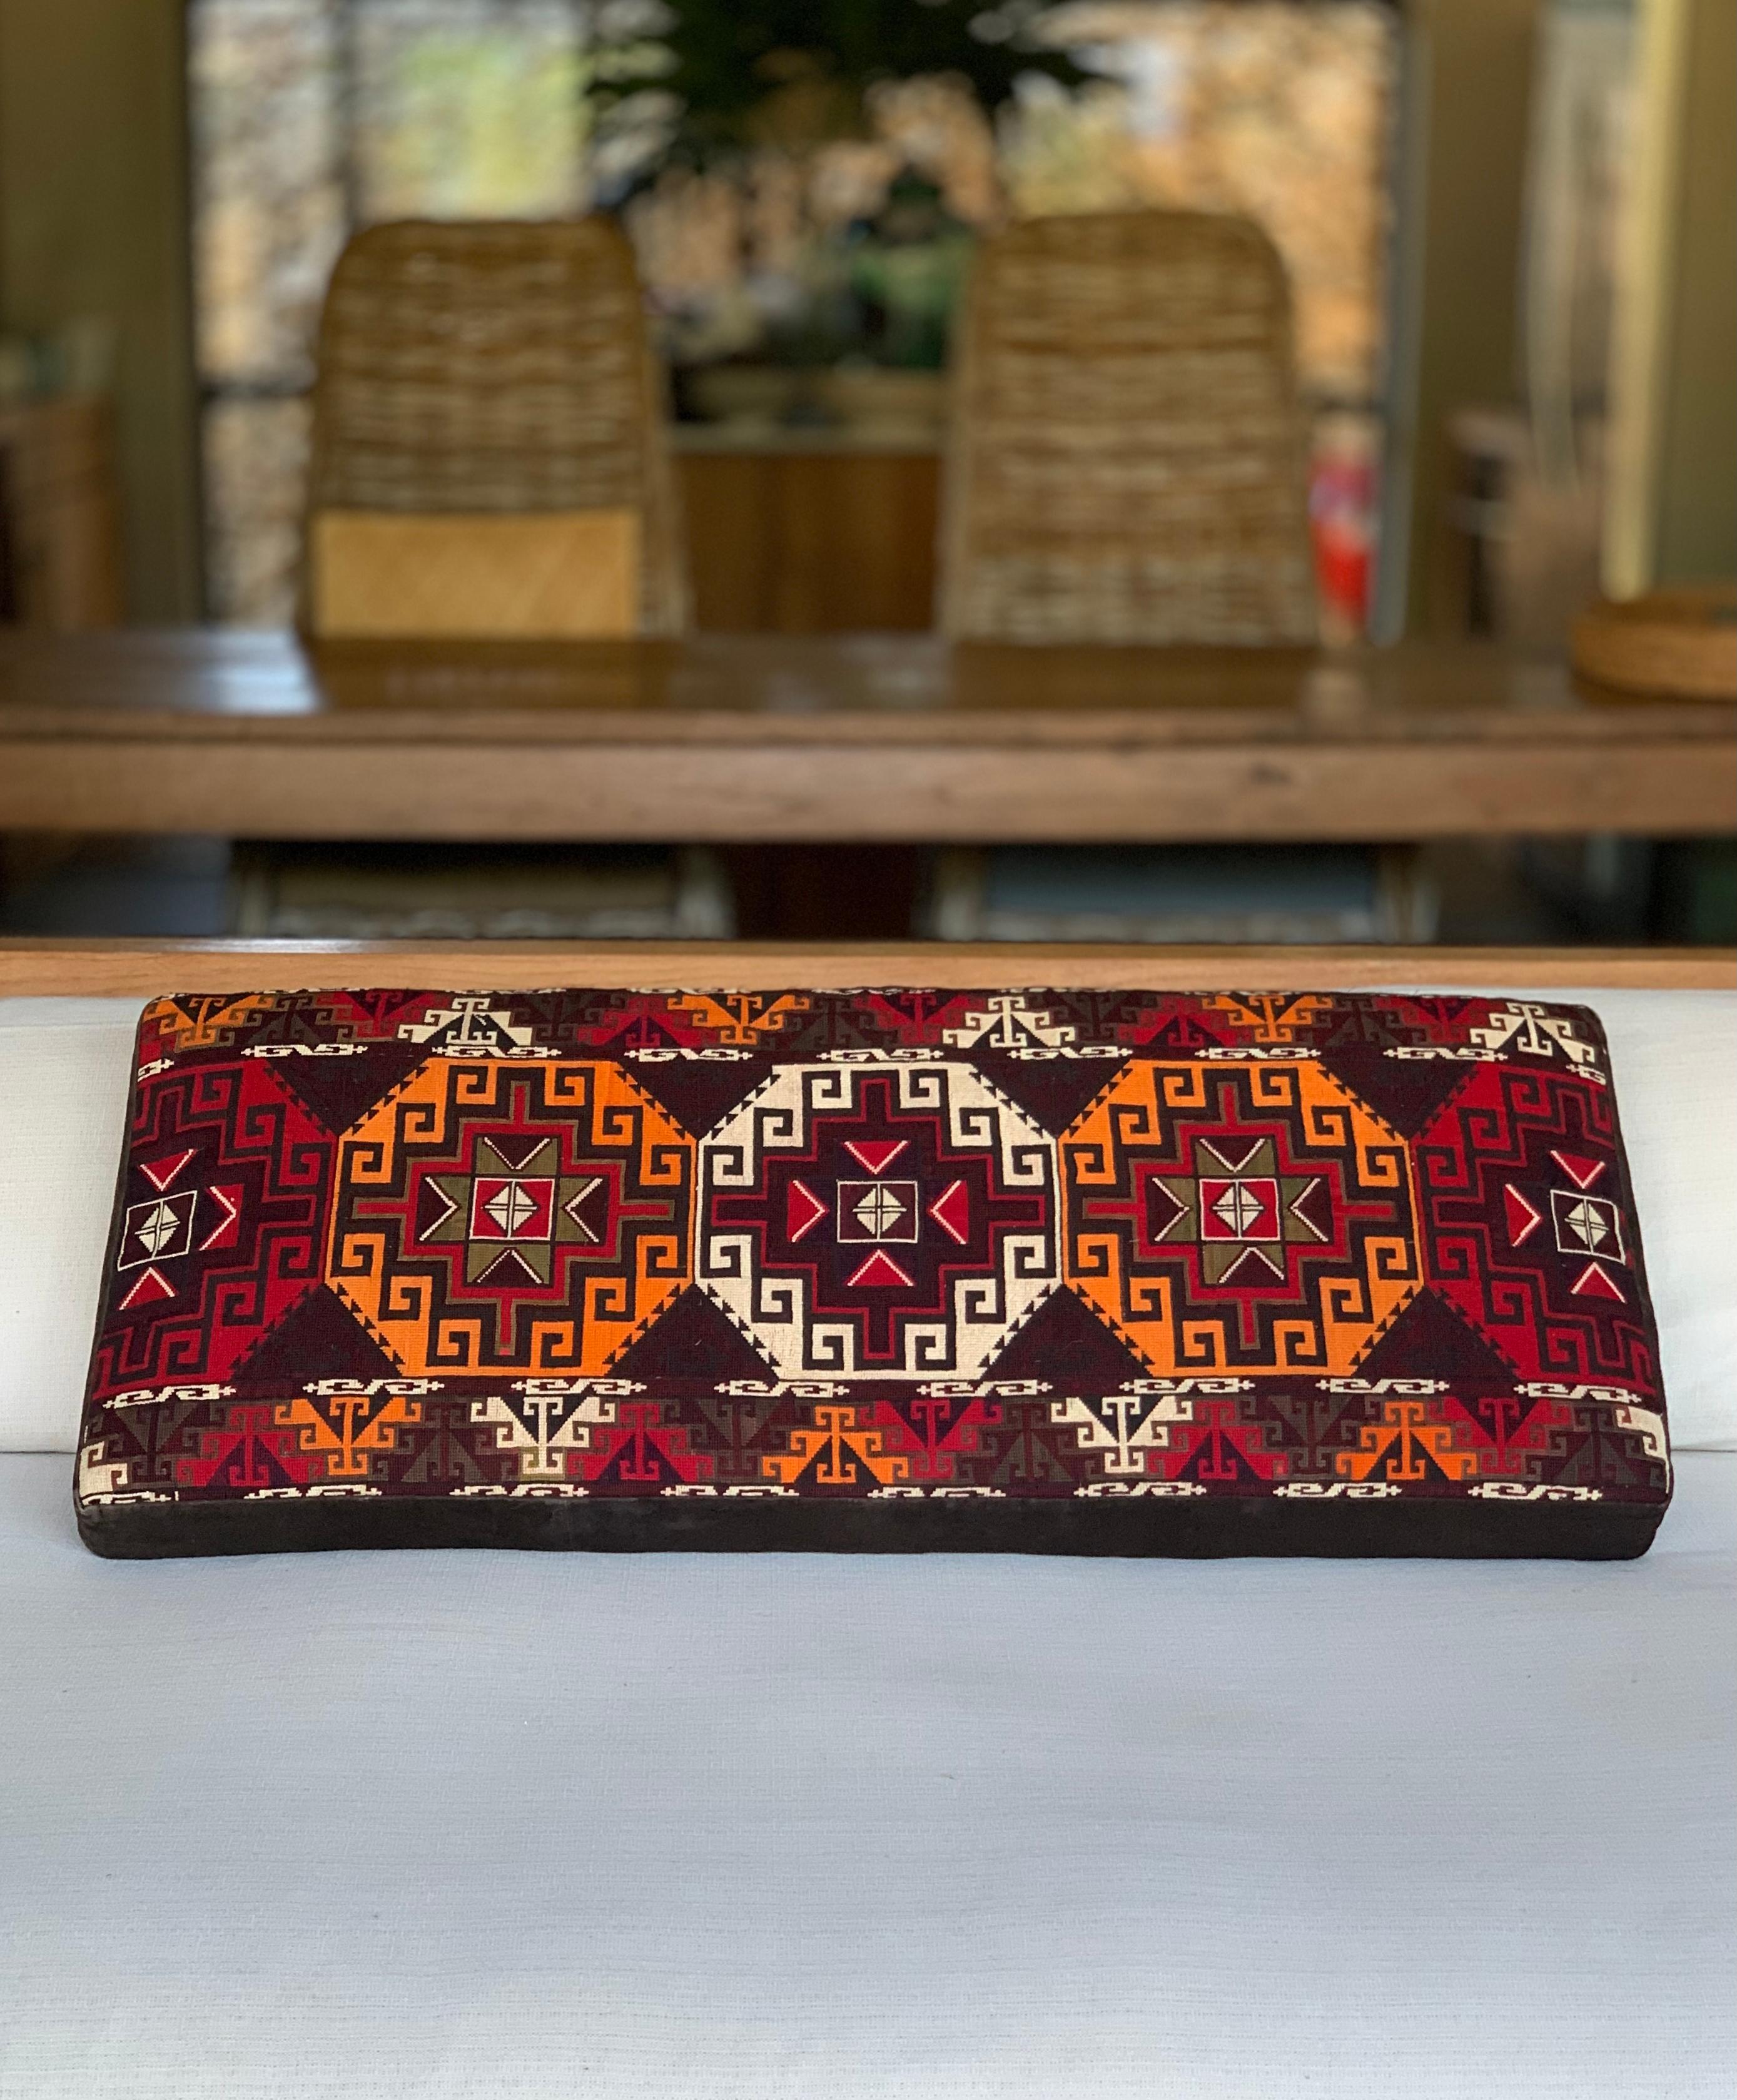 The original textile from which this pillow was crafted from is a “Suzani” from Central Asian nomadic peoples primarily from Kazakhstan, Tajikistan and Uzbekistan. Suzanis are embroidered textiles composed of mainly Cotton. They are cherished and